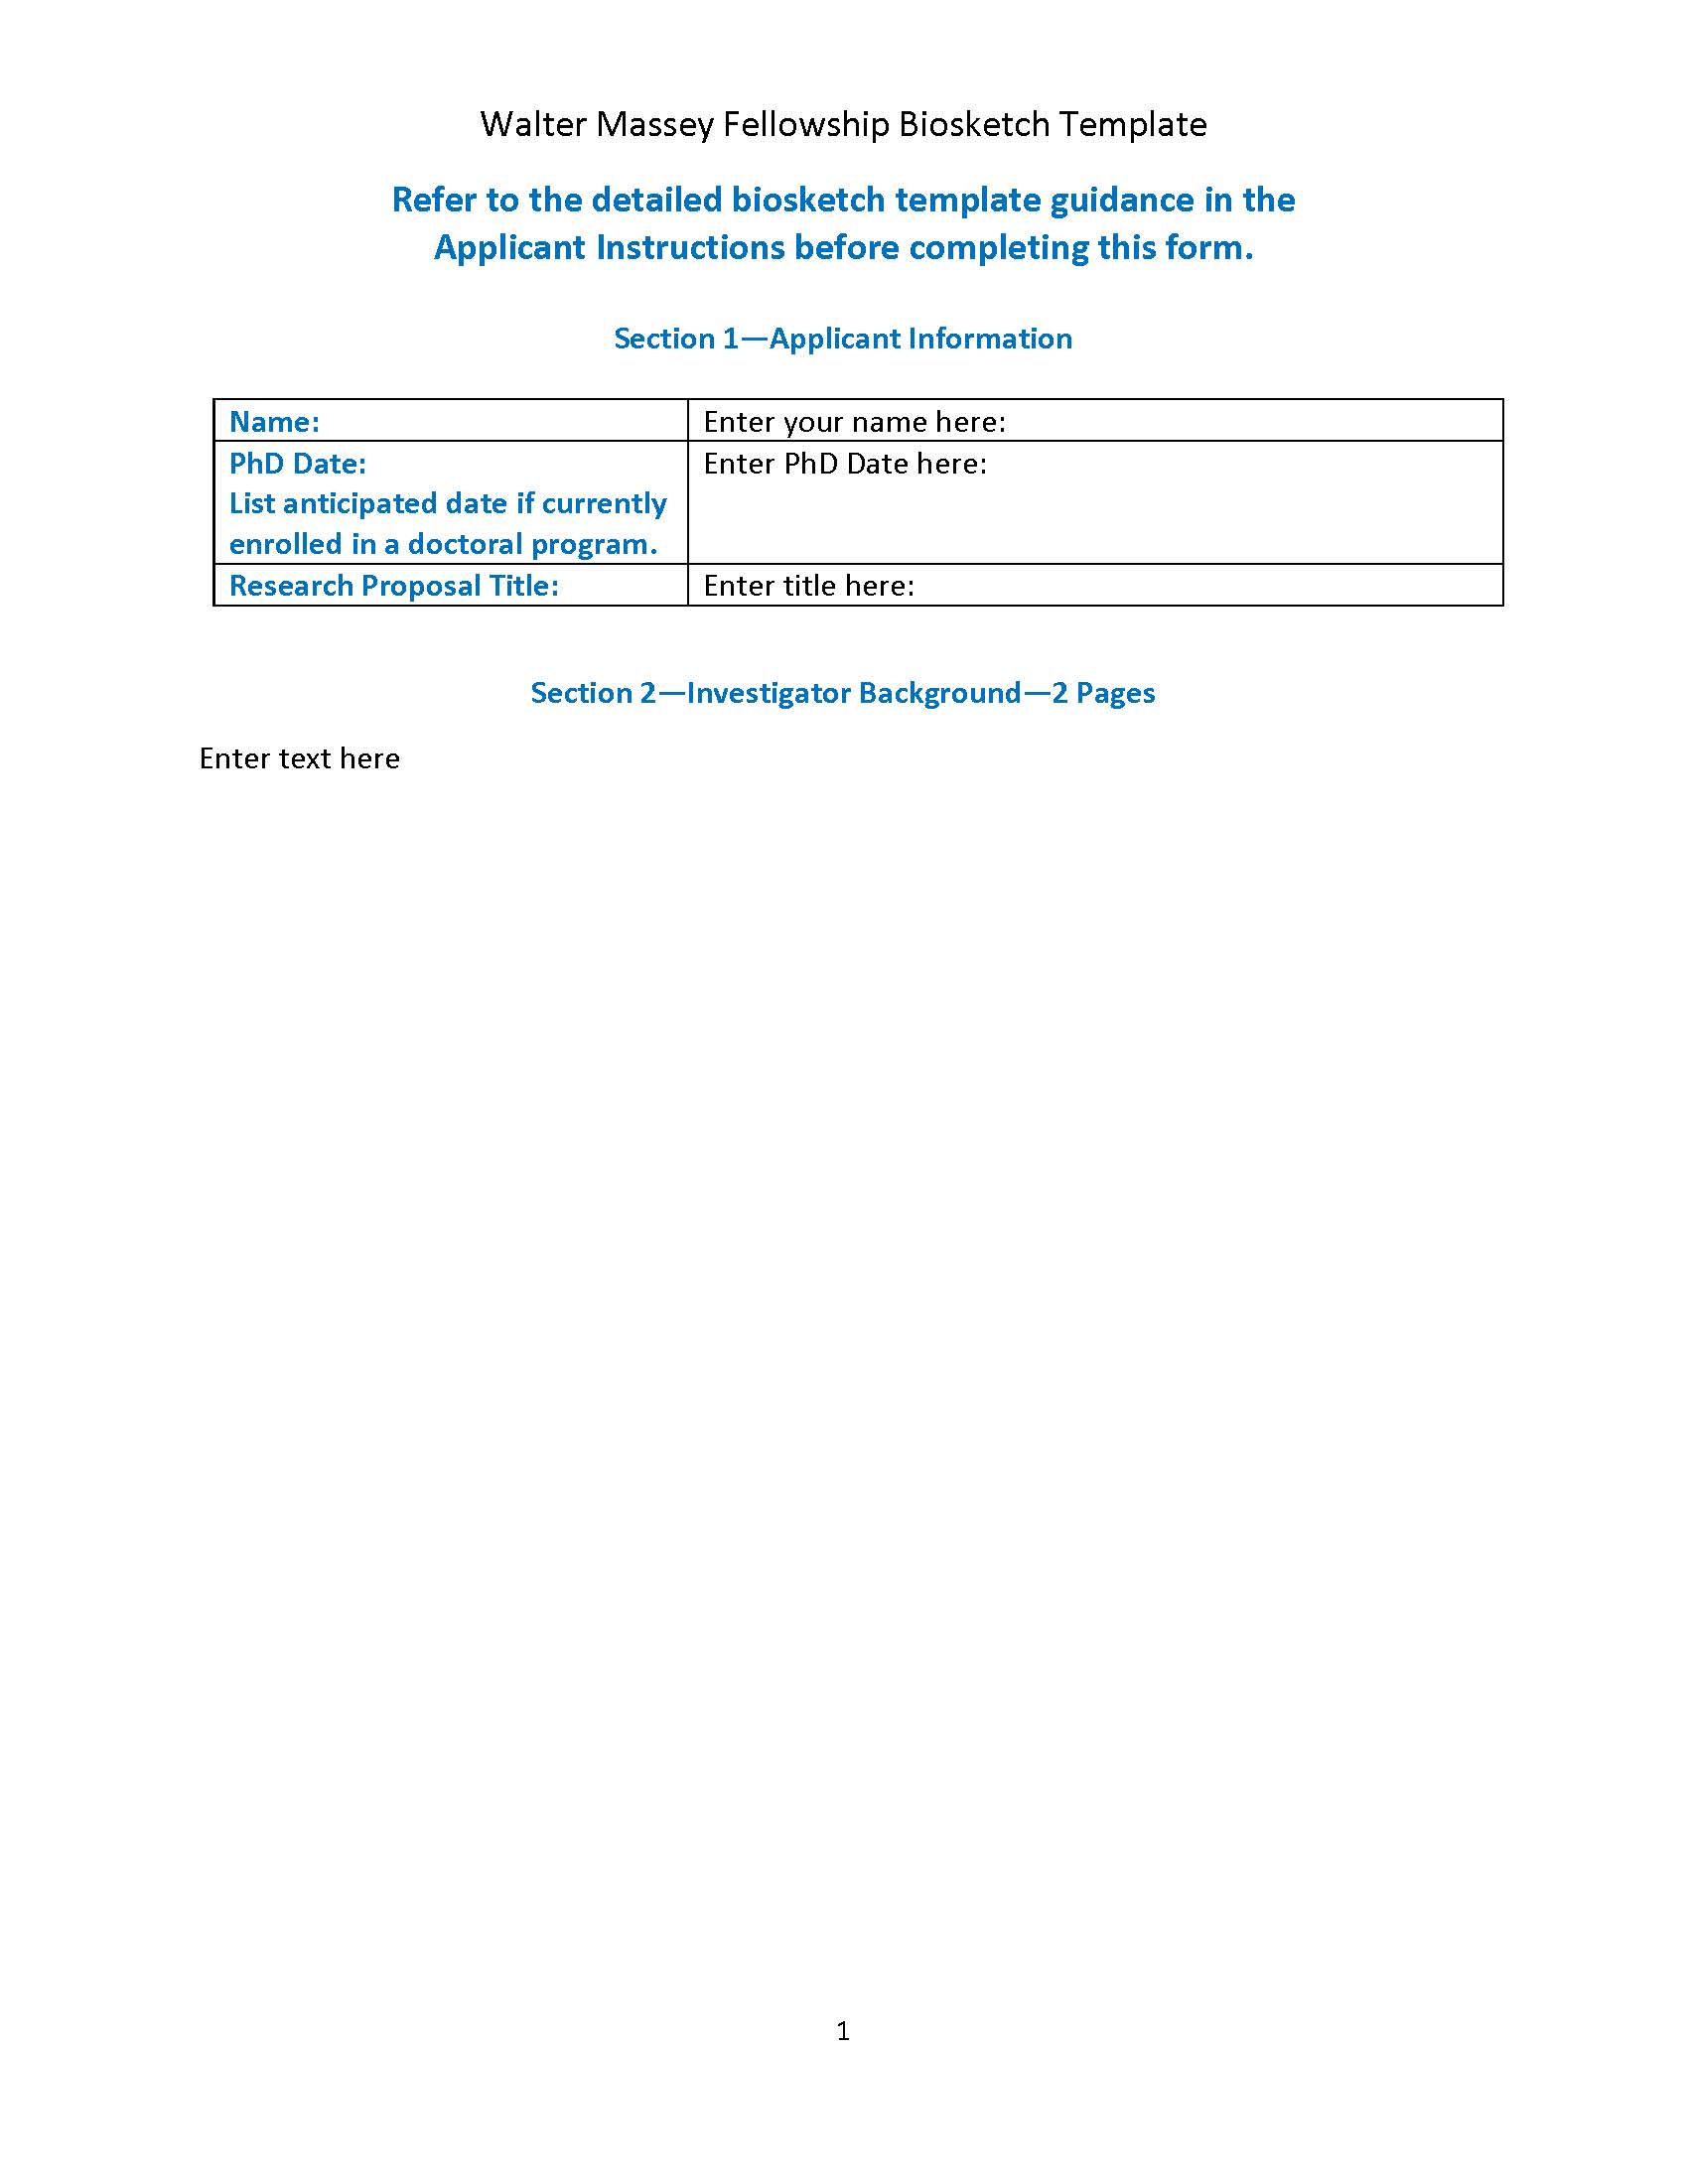 Image of the Walter Massey Fellowship biosketch template